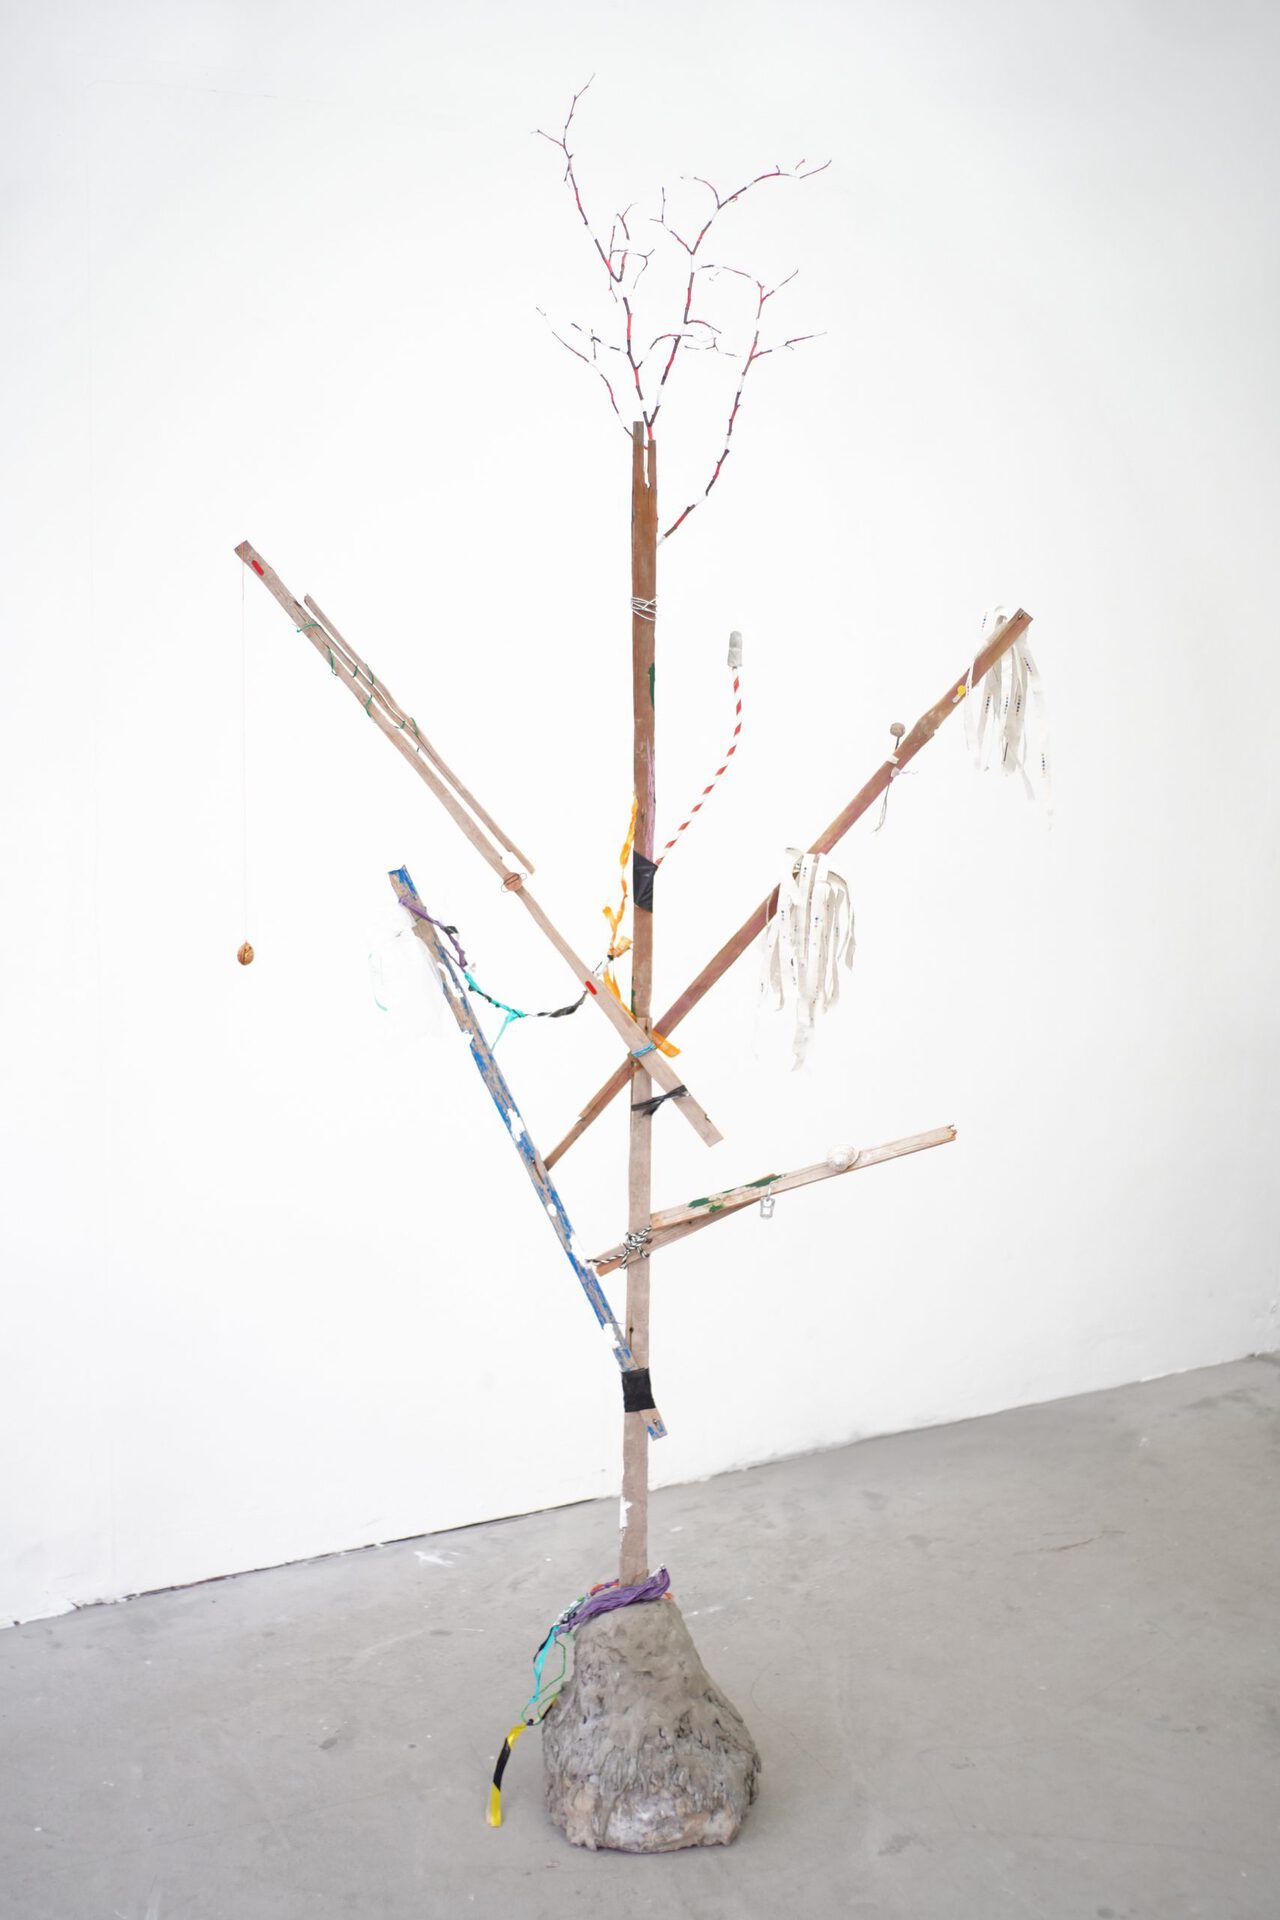 Ilona Balaga, Passerby, 2021, found wood, concrete, acrylic paint, plastic bags, 1p, tree branch, acorn, metal hanger, pull-tab, snail, string, rubber bands, gaffer tape, newspaper, straw, metal wire, sewing thread, peach kernel, paperclip, 195/70/27 cm